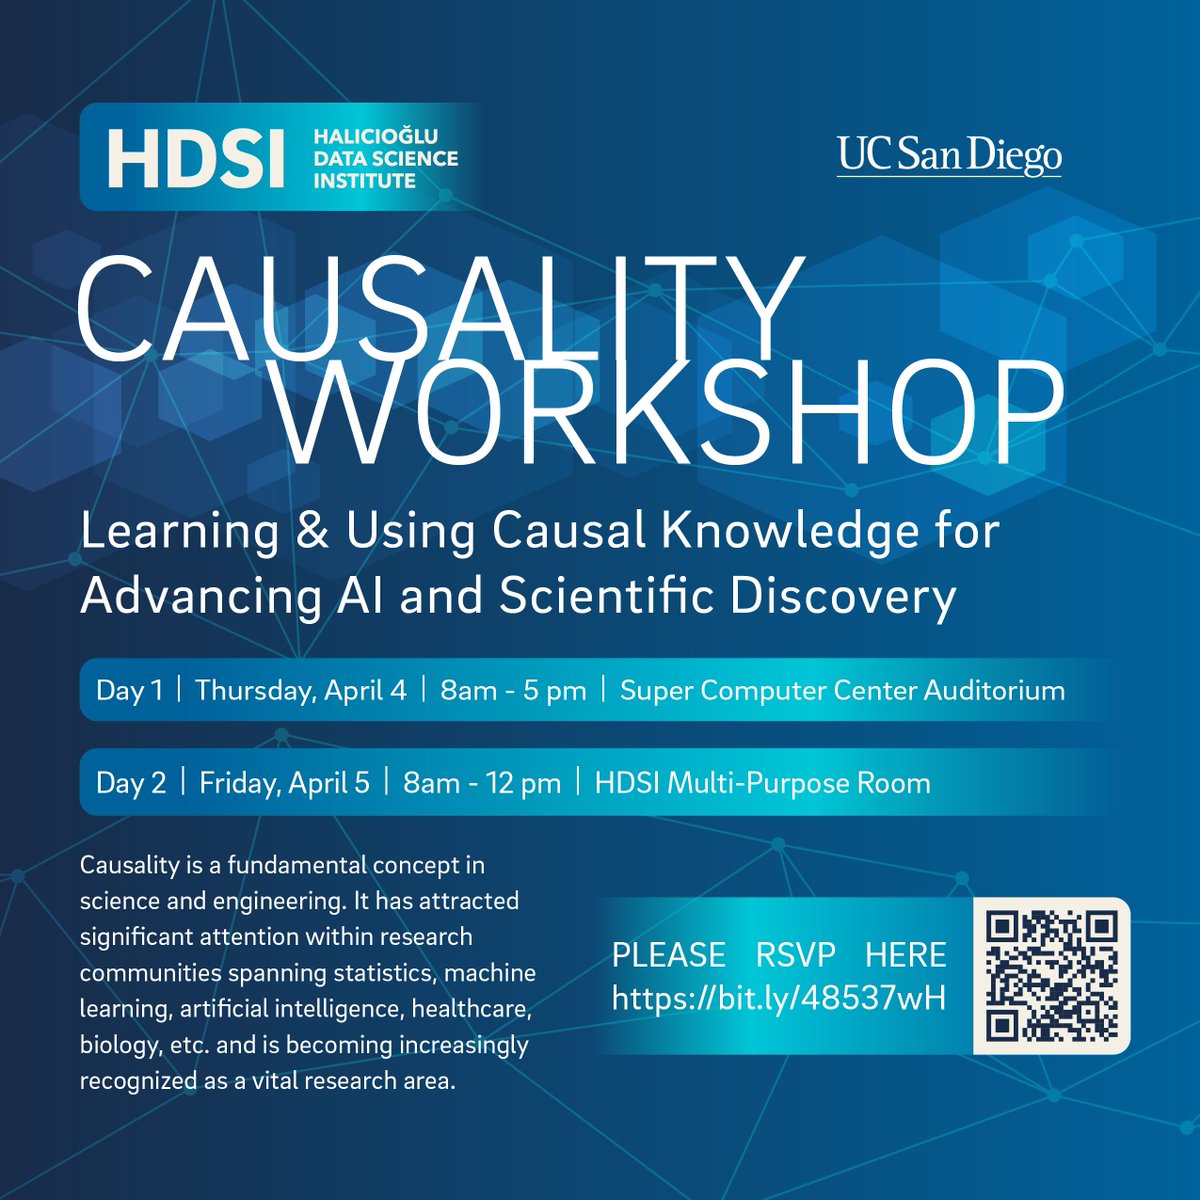 Join us for the Causality Workshop by HDSI, UC San Diego📊! Dive into the exciting world of causal knowledge and its applications in AI and scientific discovery. RSVP now! #Causality #DataScience #AI #UCSD #HDSI #Workshop